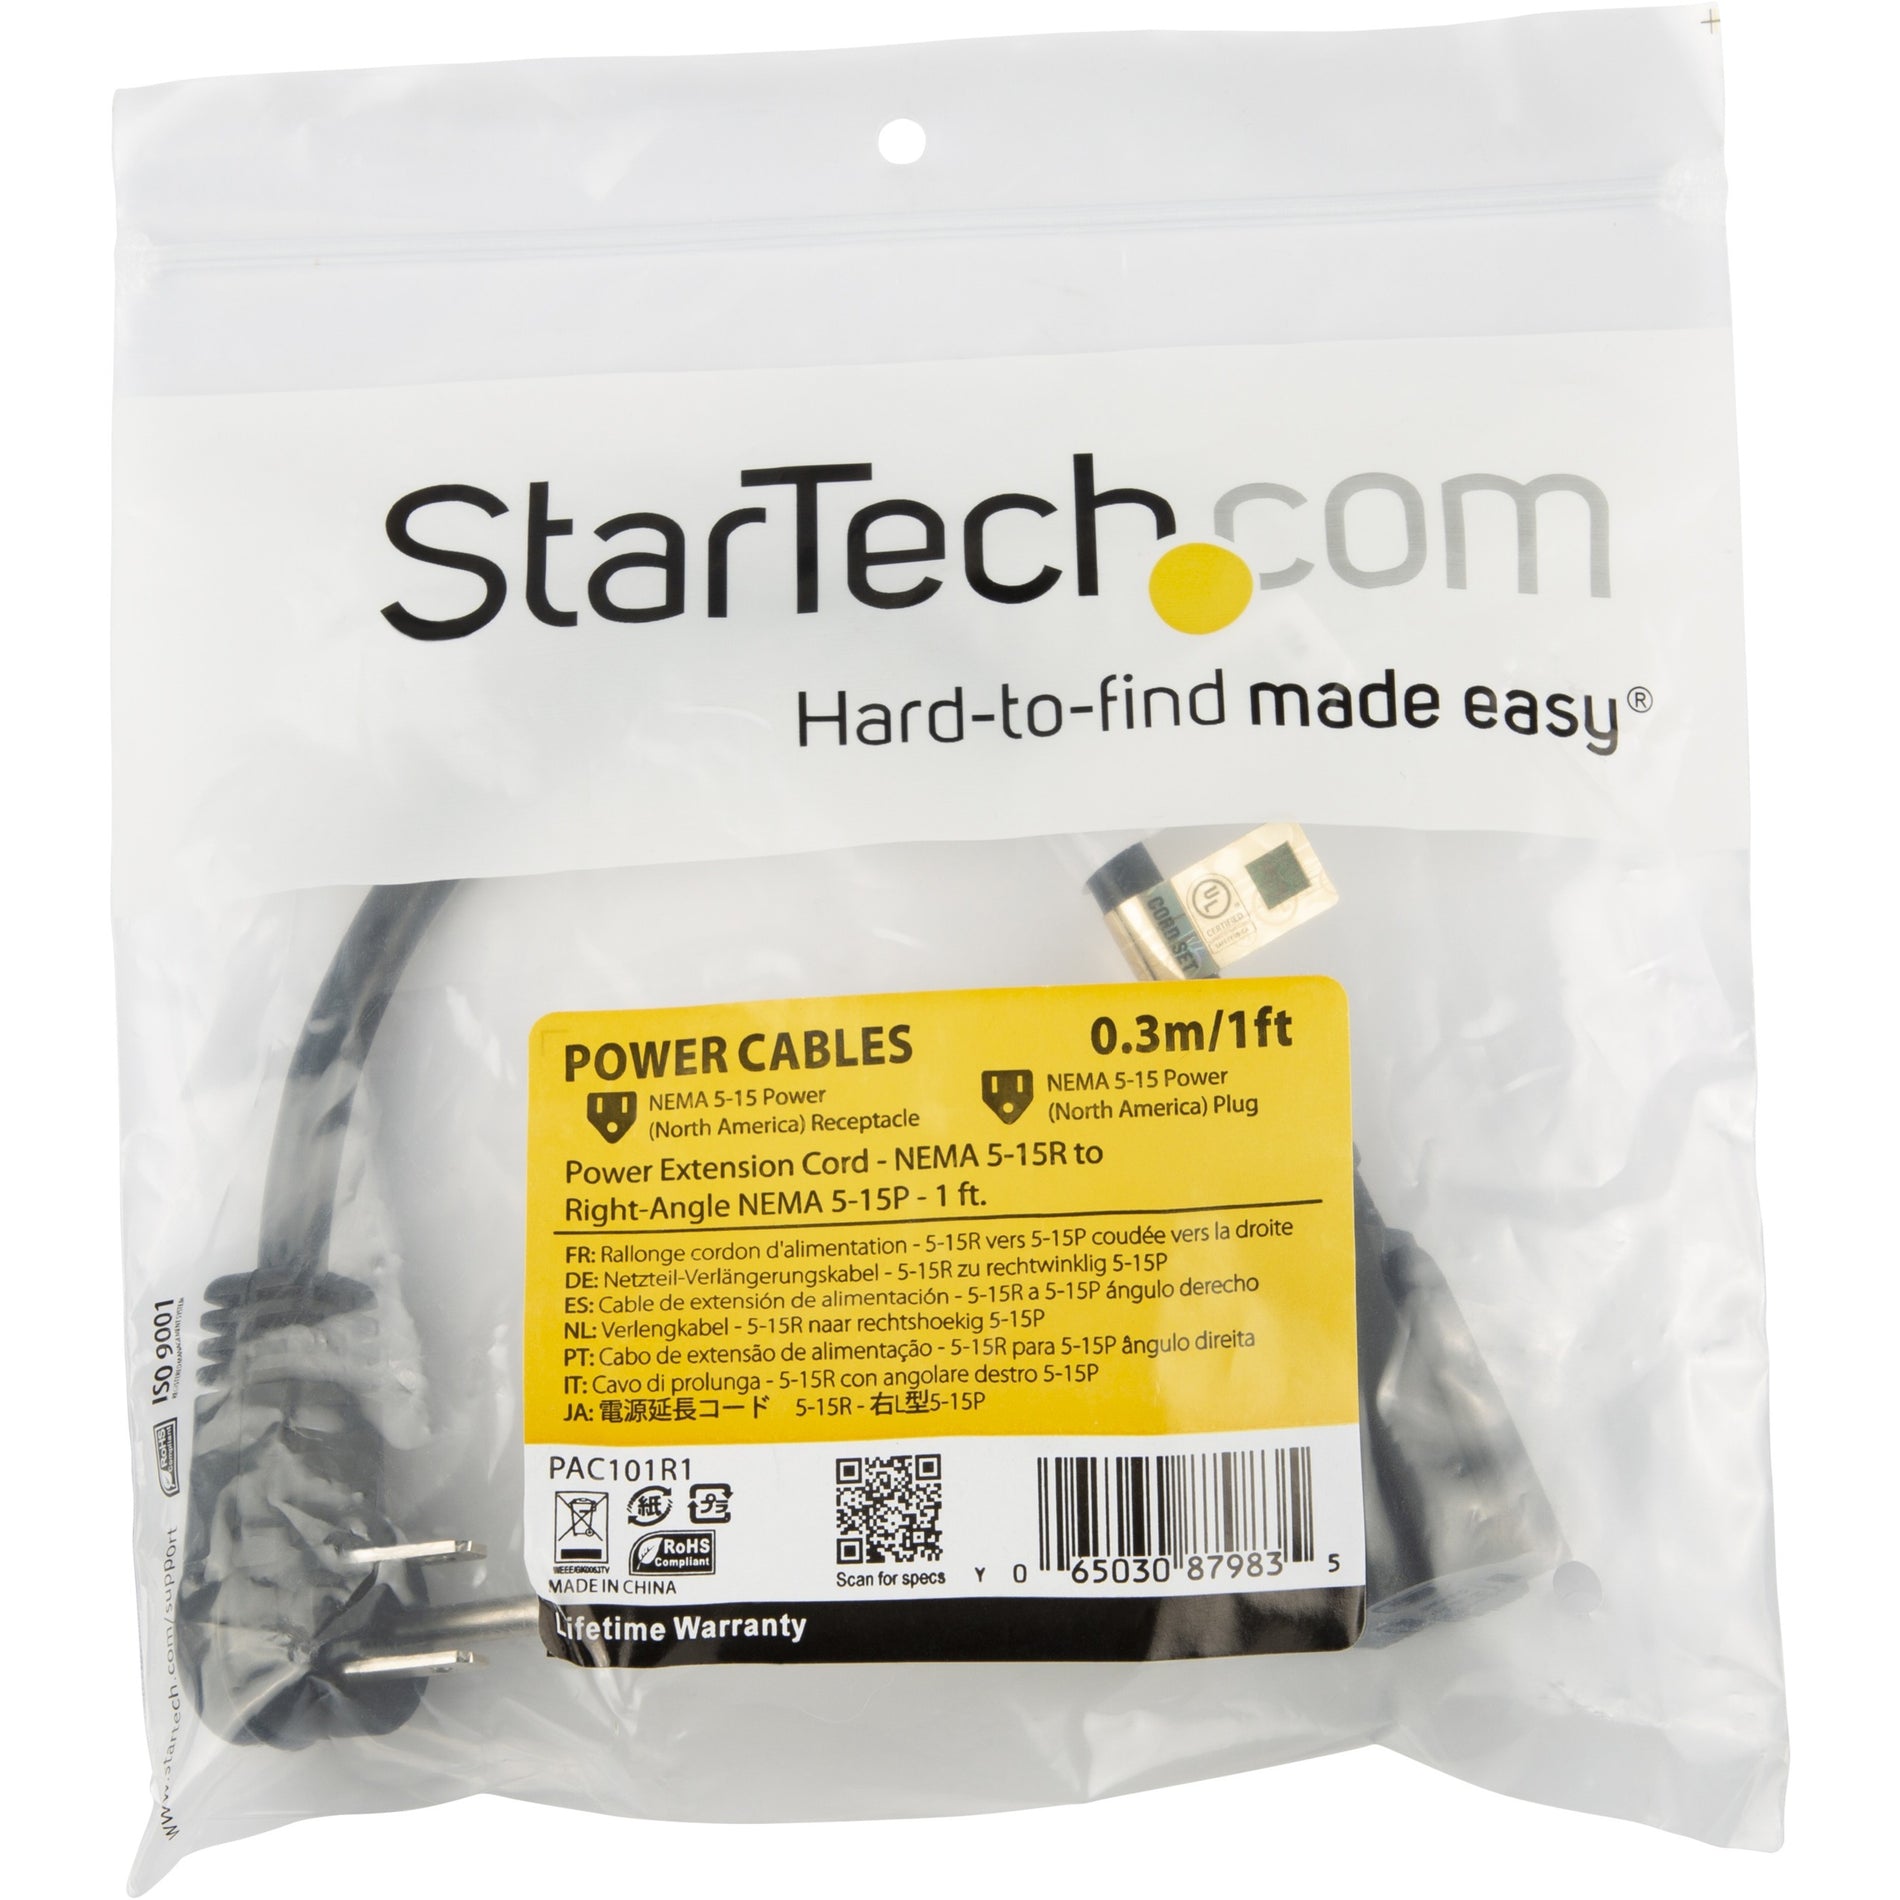 StarTech.com PAC101R1 Power Extension Cord, 1 ft Flat Low Profile Right Angle Power Cable